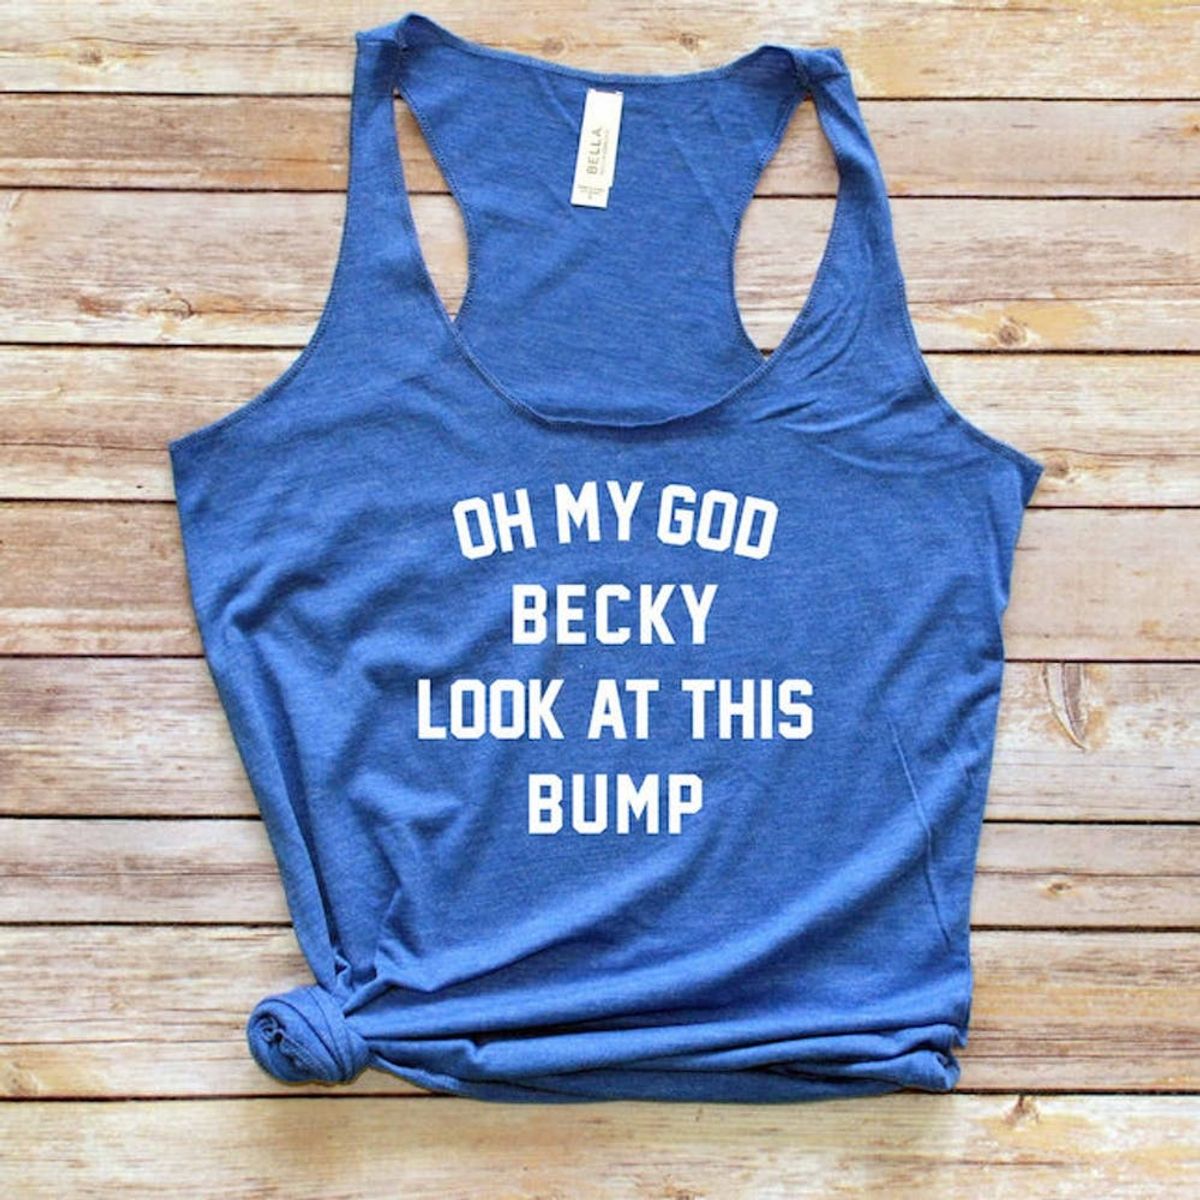 11 Soft T-Shirts That Will Give Pregnant Women a Good Laugh - Brit + Co